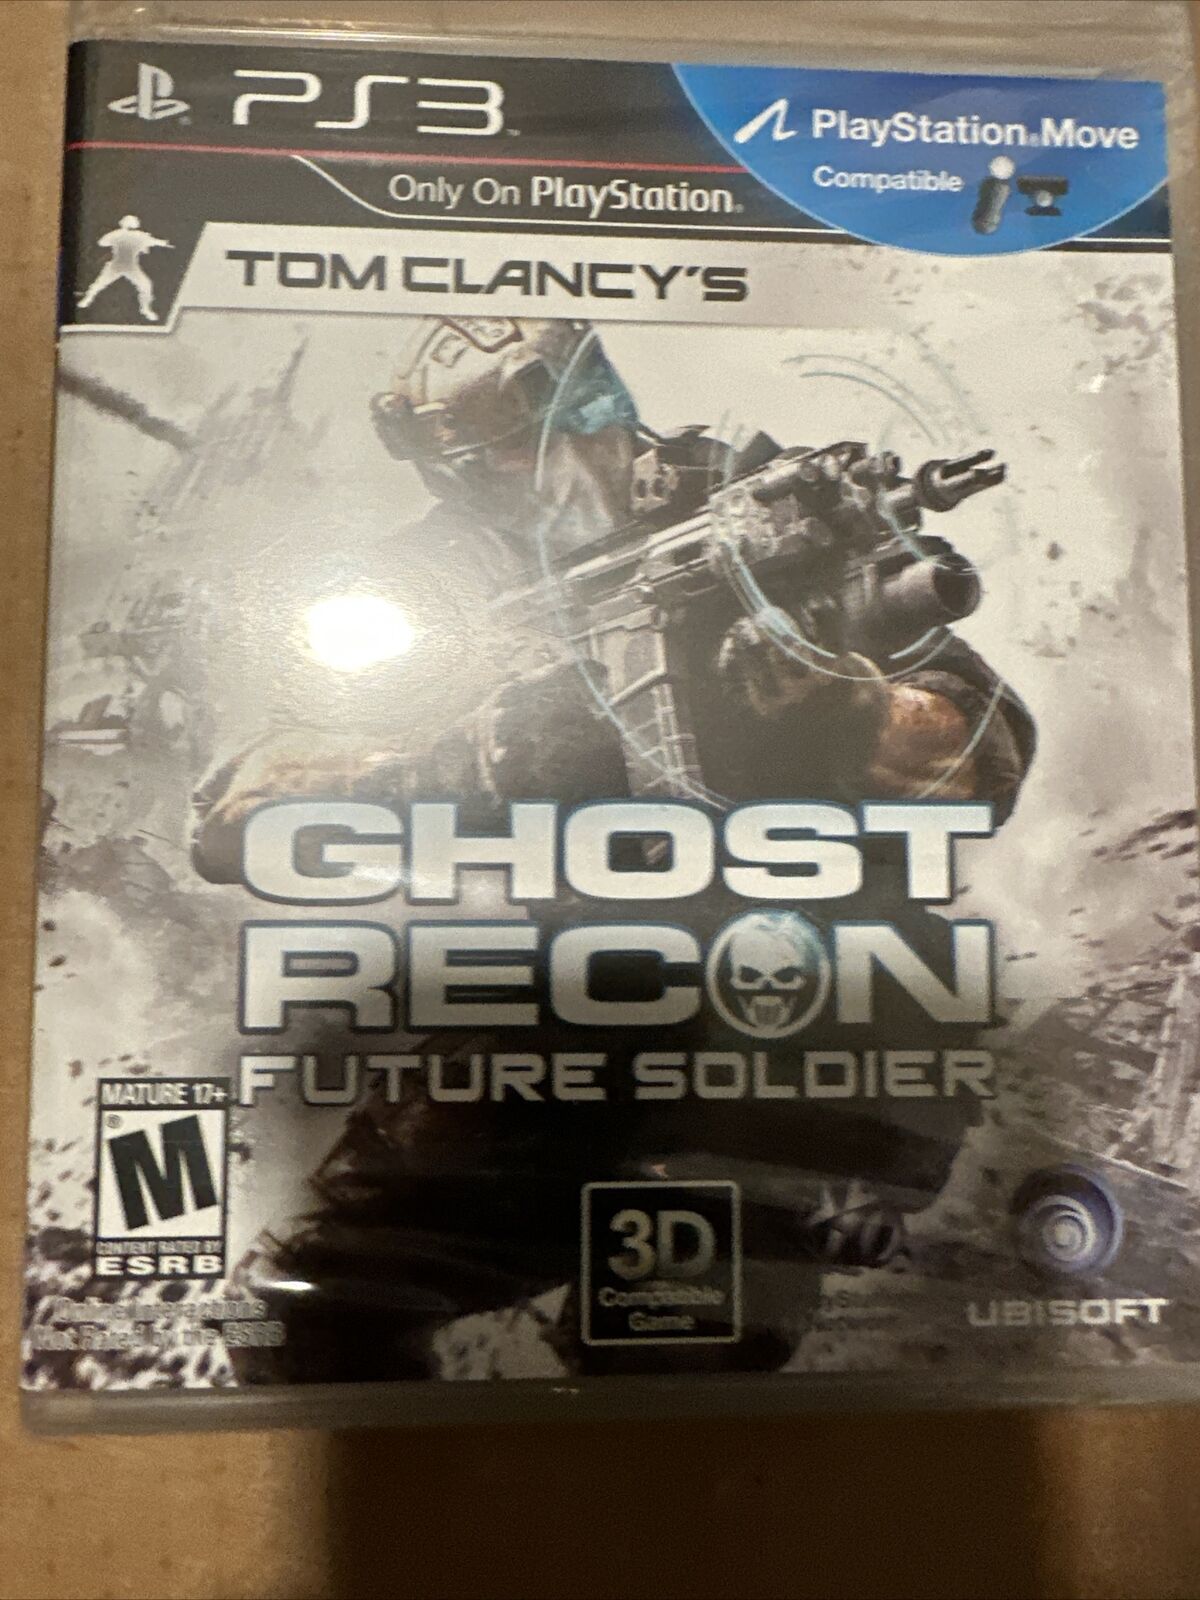 Tom Clancy's Ghost Recon: Future Soldier (Sony PlayStation 3, factory sealed